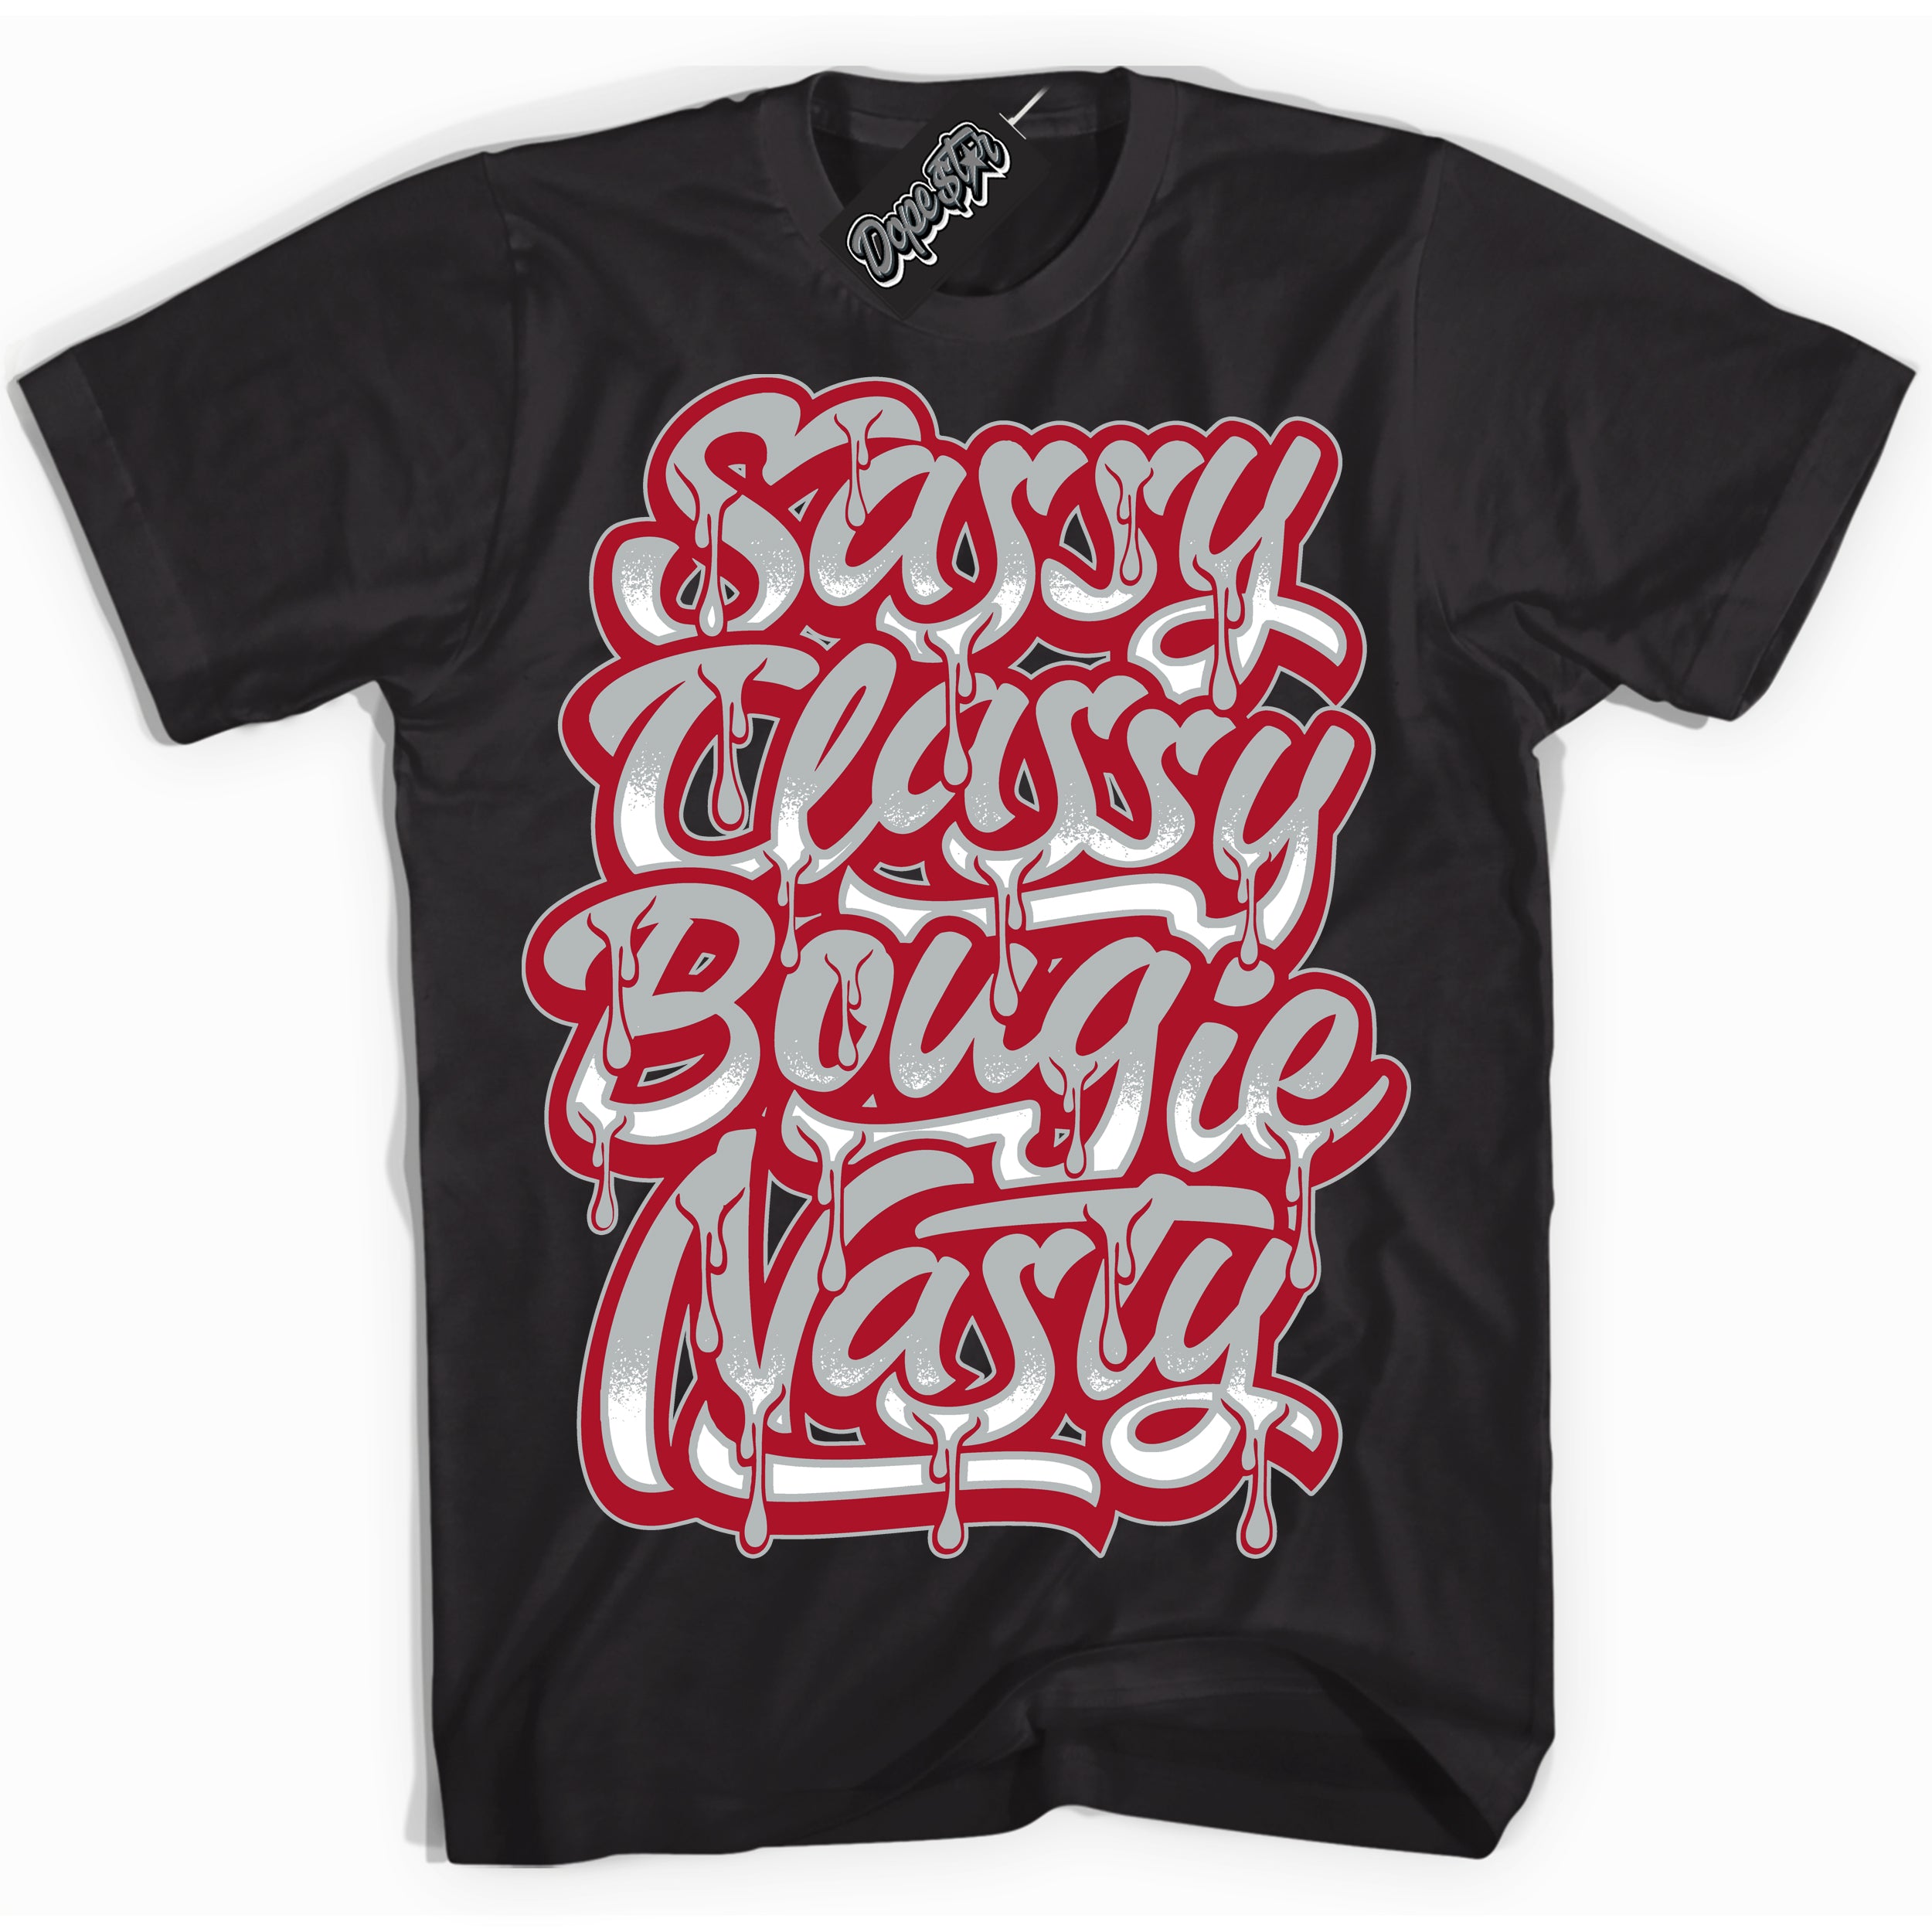 Cool Black Shirt with “ Sassy Classy” design that perfectly matches Reverse Ultraman Sneakers.